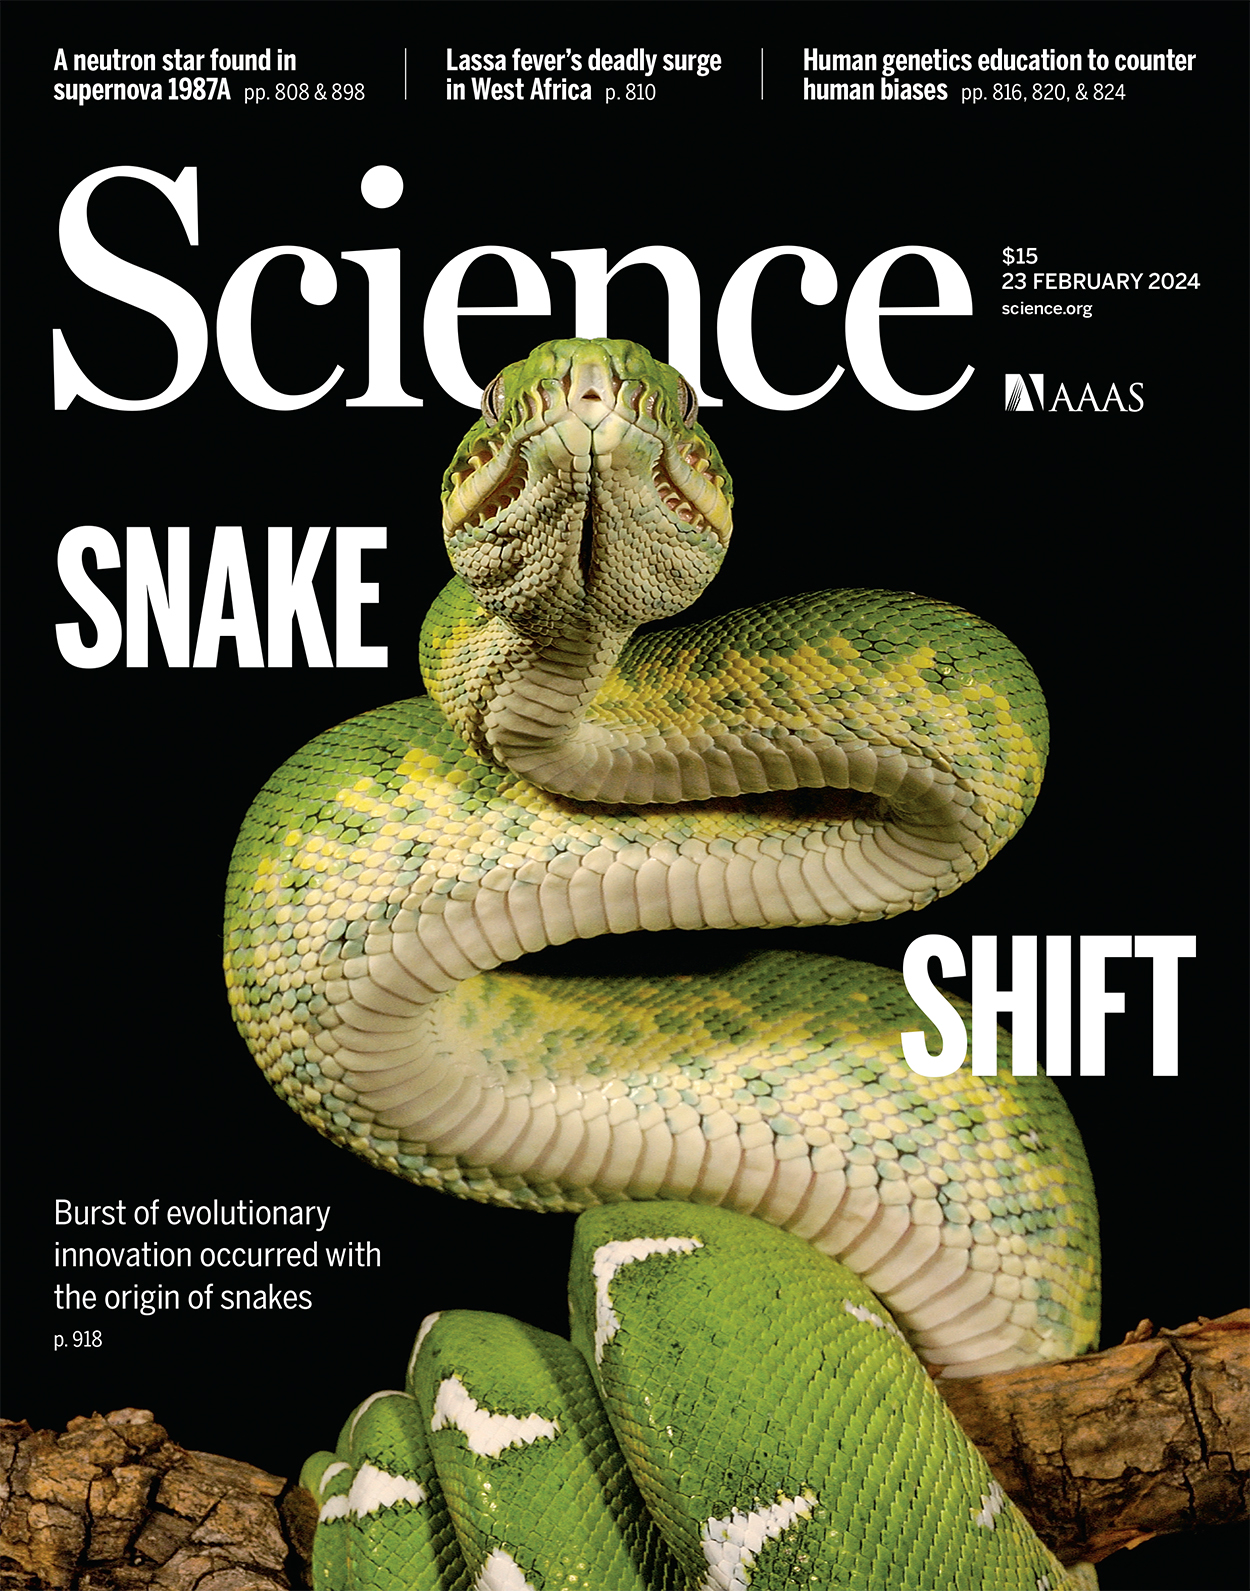 AUM associate professor Gabe Costa and collaborators earned a cover story in the journal "Science."